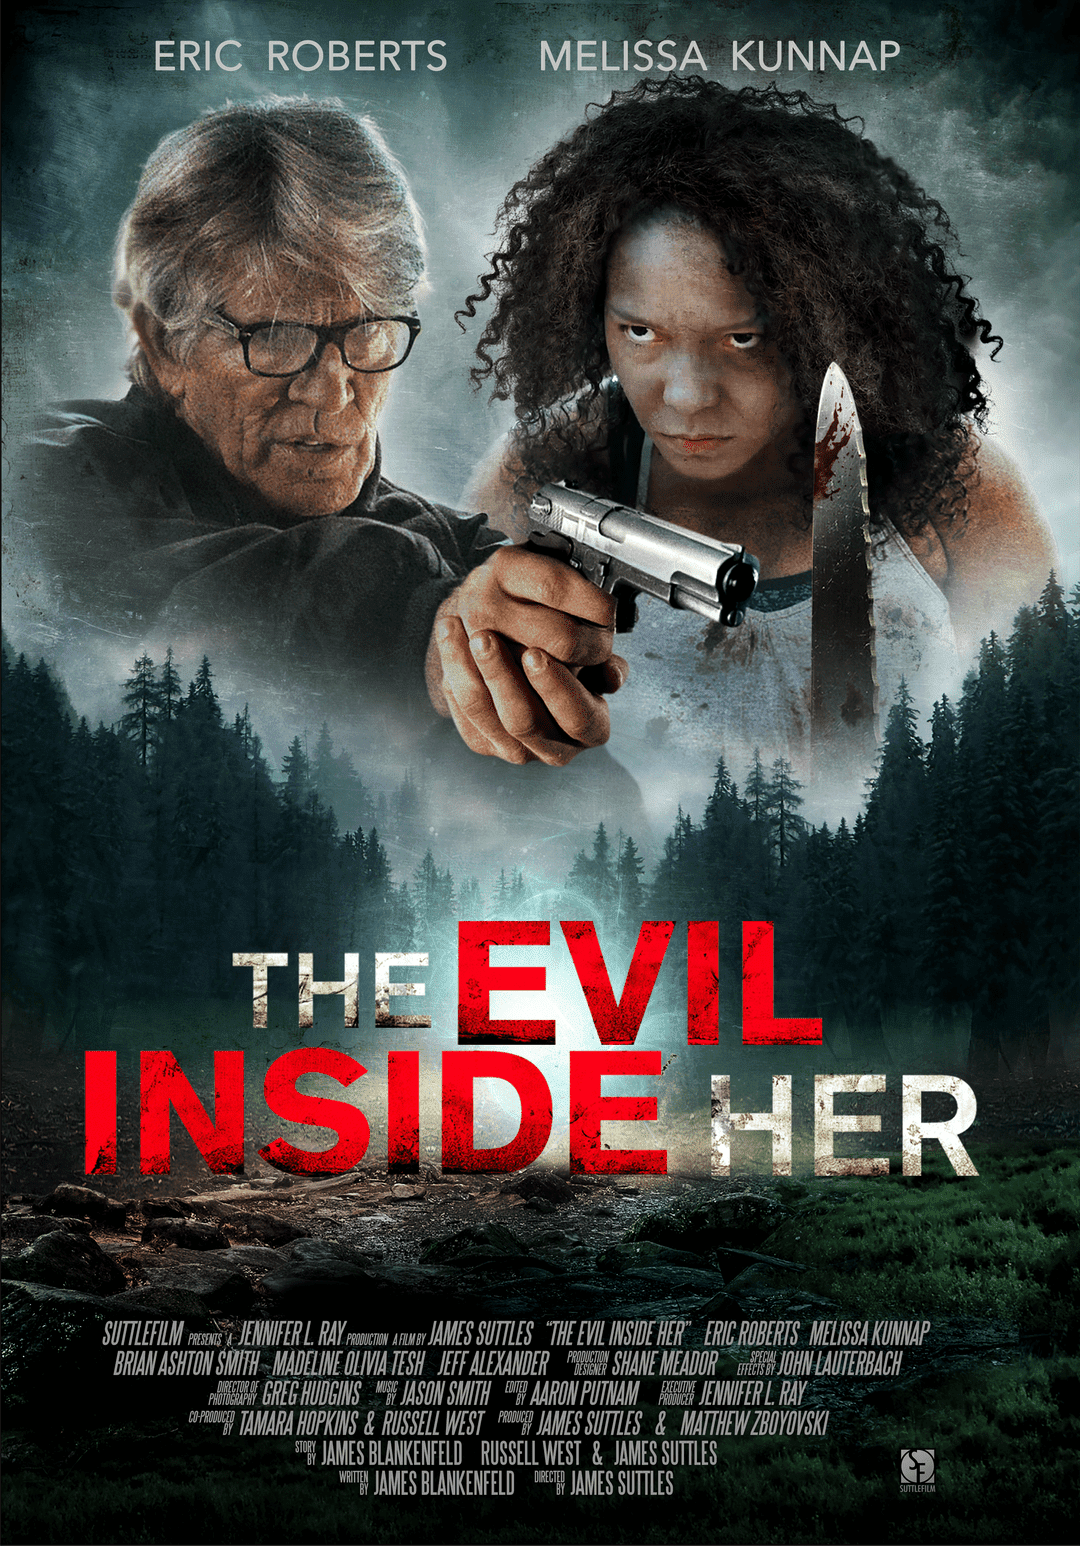 The Evil Inside Her Puts a Knife in a Psychotic's Hand this June 13th ~ 28DLA1080 x 1546